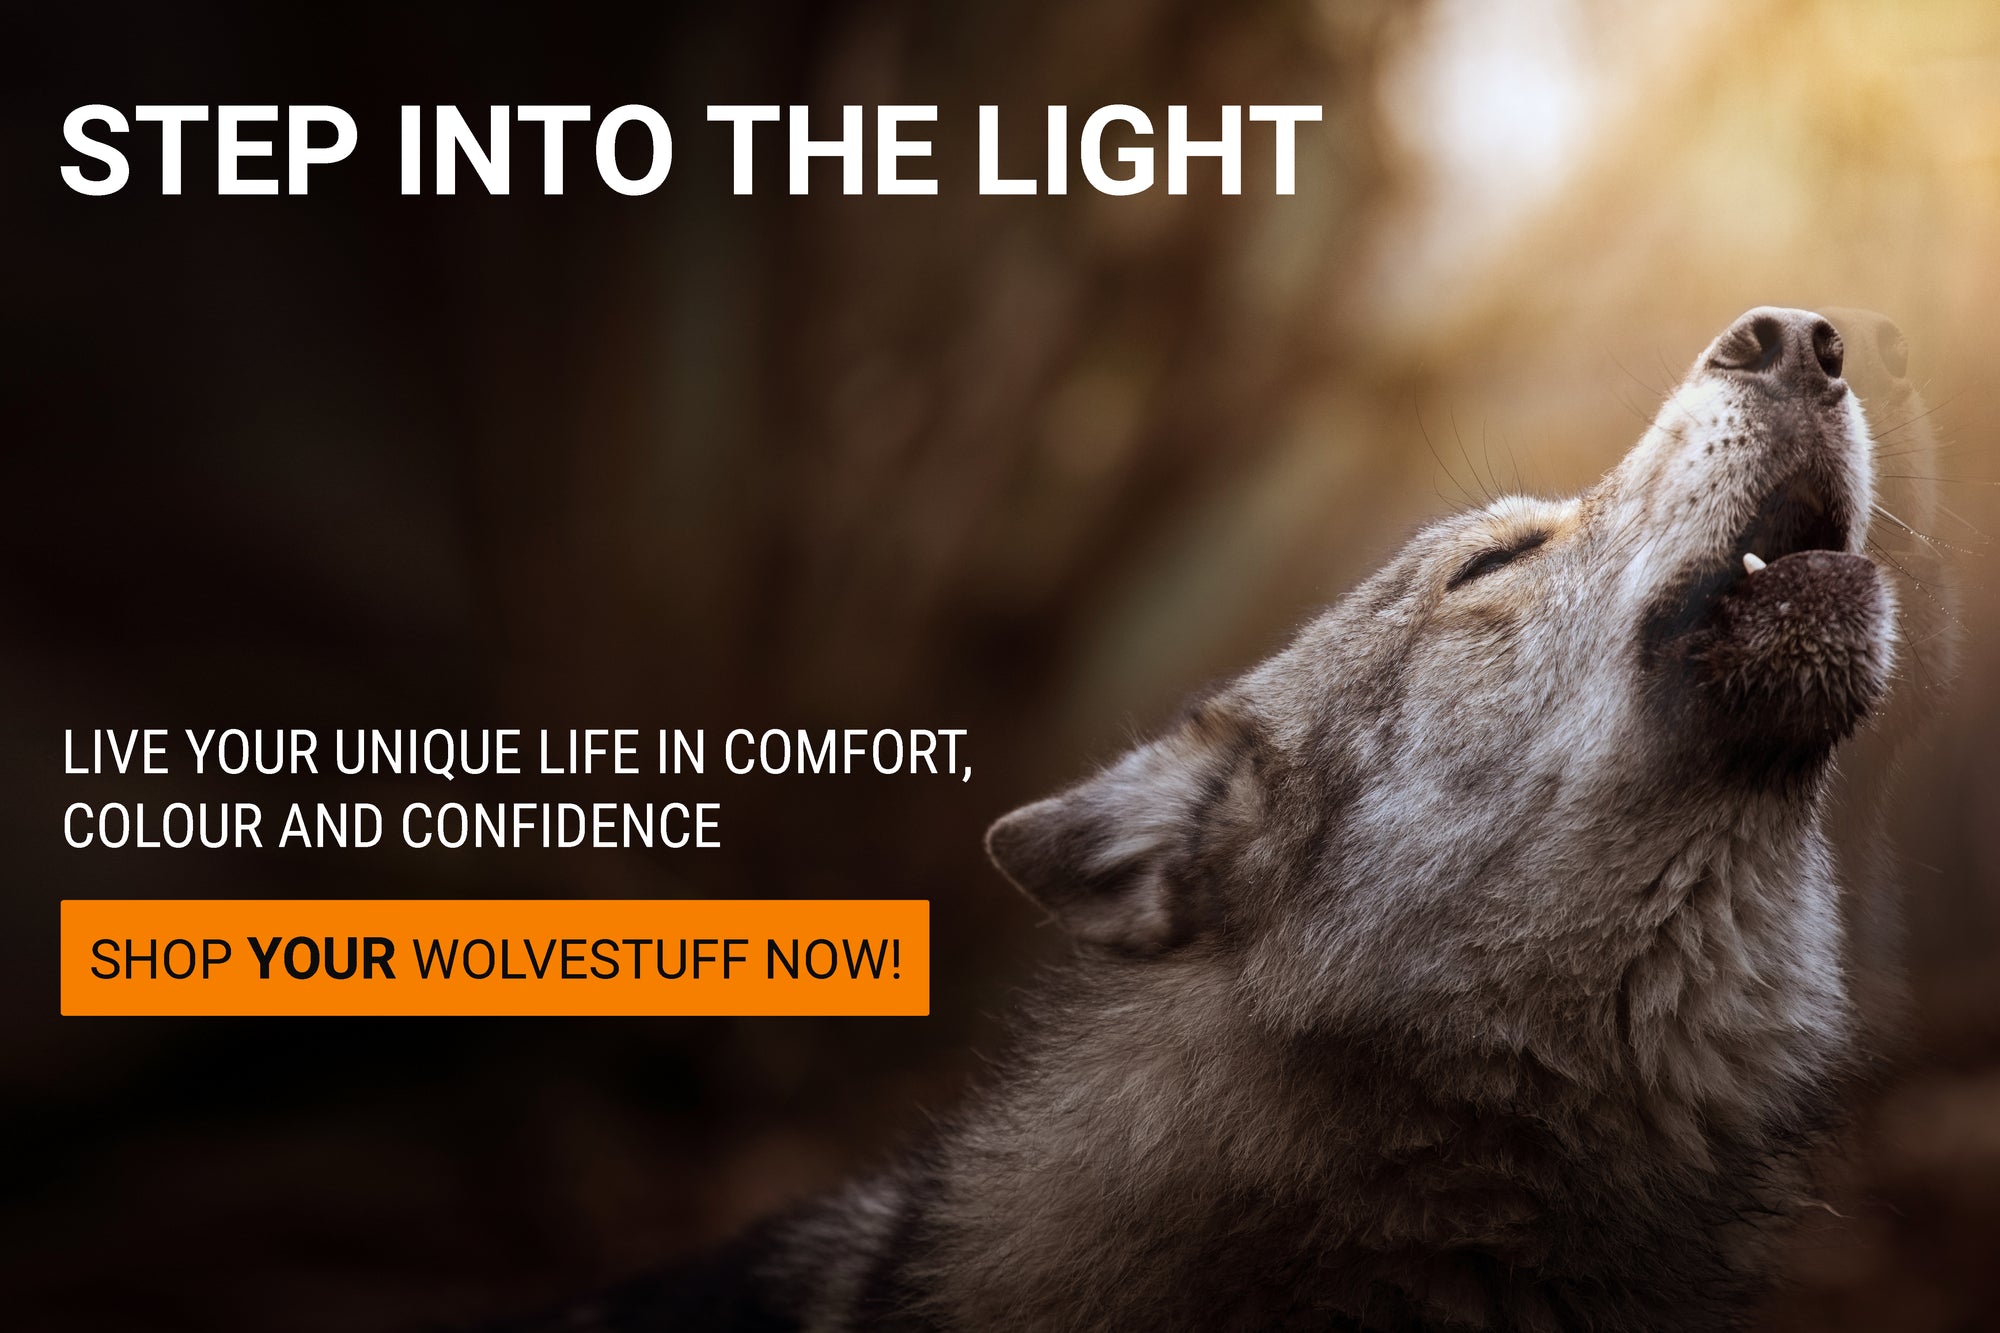 Wolf stuff? A howling wolf inviting you to step into the light and shop at vitelpharma